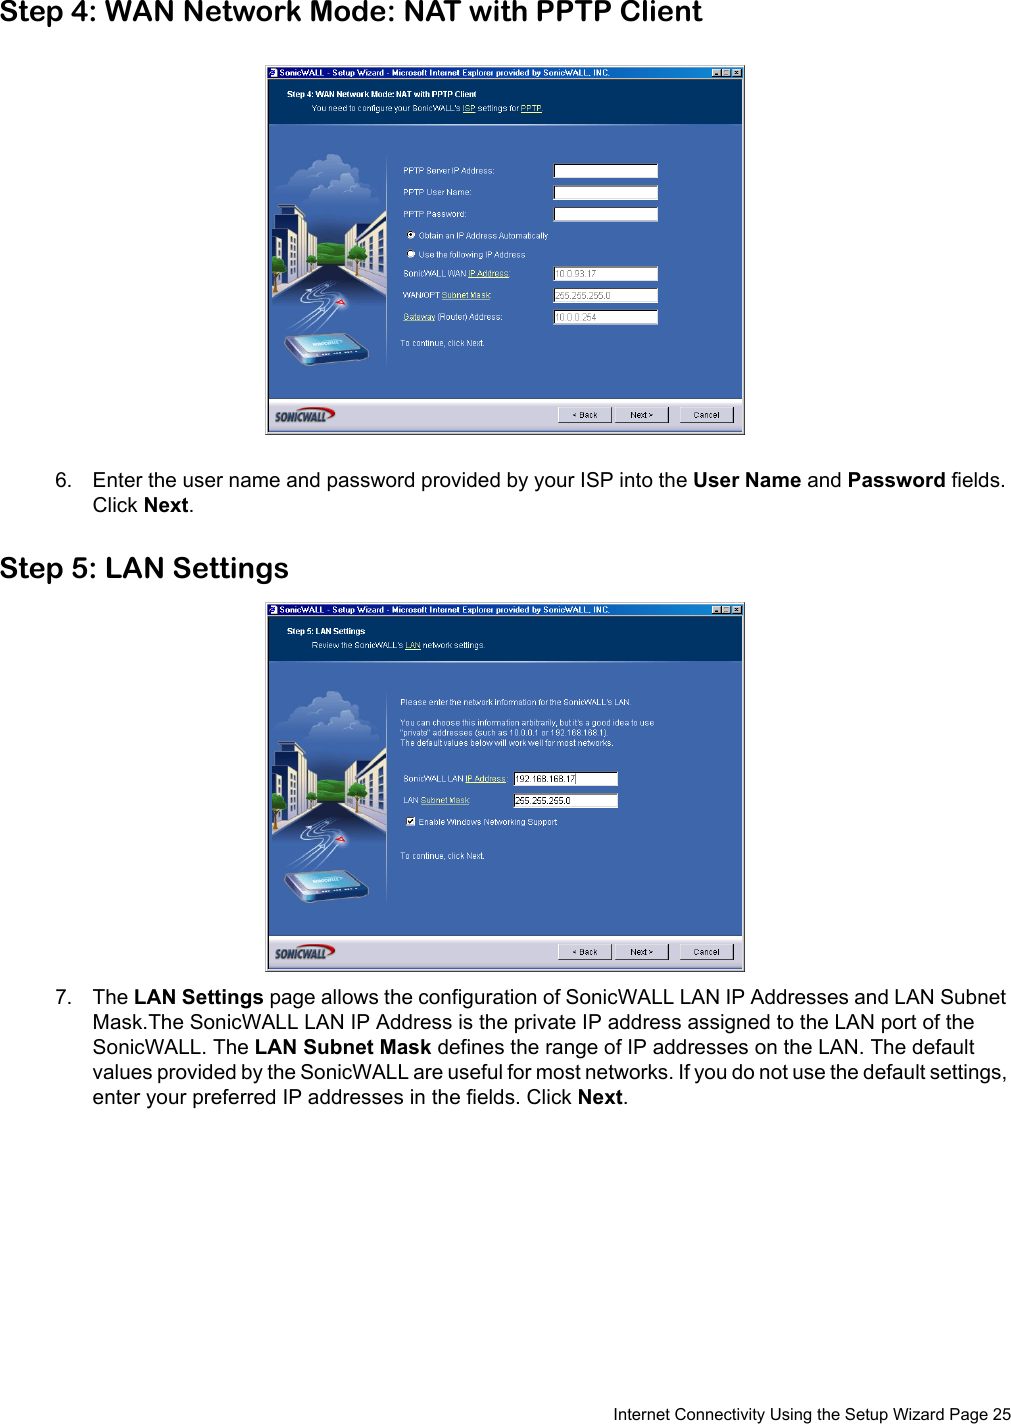  Internet Connectivity Using the Setup Wizard Page 25Step 4: WAN Network Mode: NAT with PPTP Client6. Enter the user name and password provided by your ISP into the User Name and Password fields. Click Next.Step 5: LAN Settings7. The LAN Settings page allows the configuration of SonicWALL LAN IP Addresses and LAN Subnet Mask.The SonicWALL LAN IP Address is the private IP address assigned to the LAN port of the SonicWALL. The LAN Subnet Mask defines the range of IP addresses on the LAN. The default values provided by the SonicWALL are useful for most networks. If you do not use the default settings, enter your preferred IP addresses in the fields. Click Next.